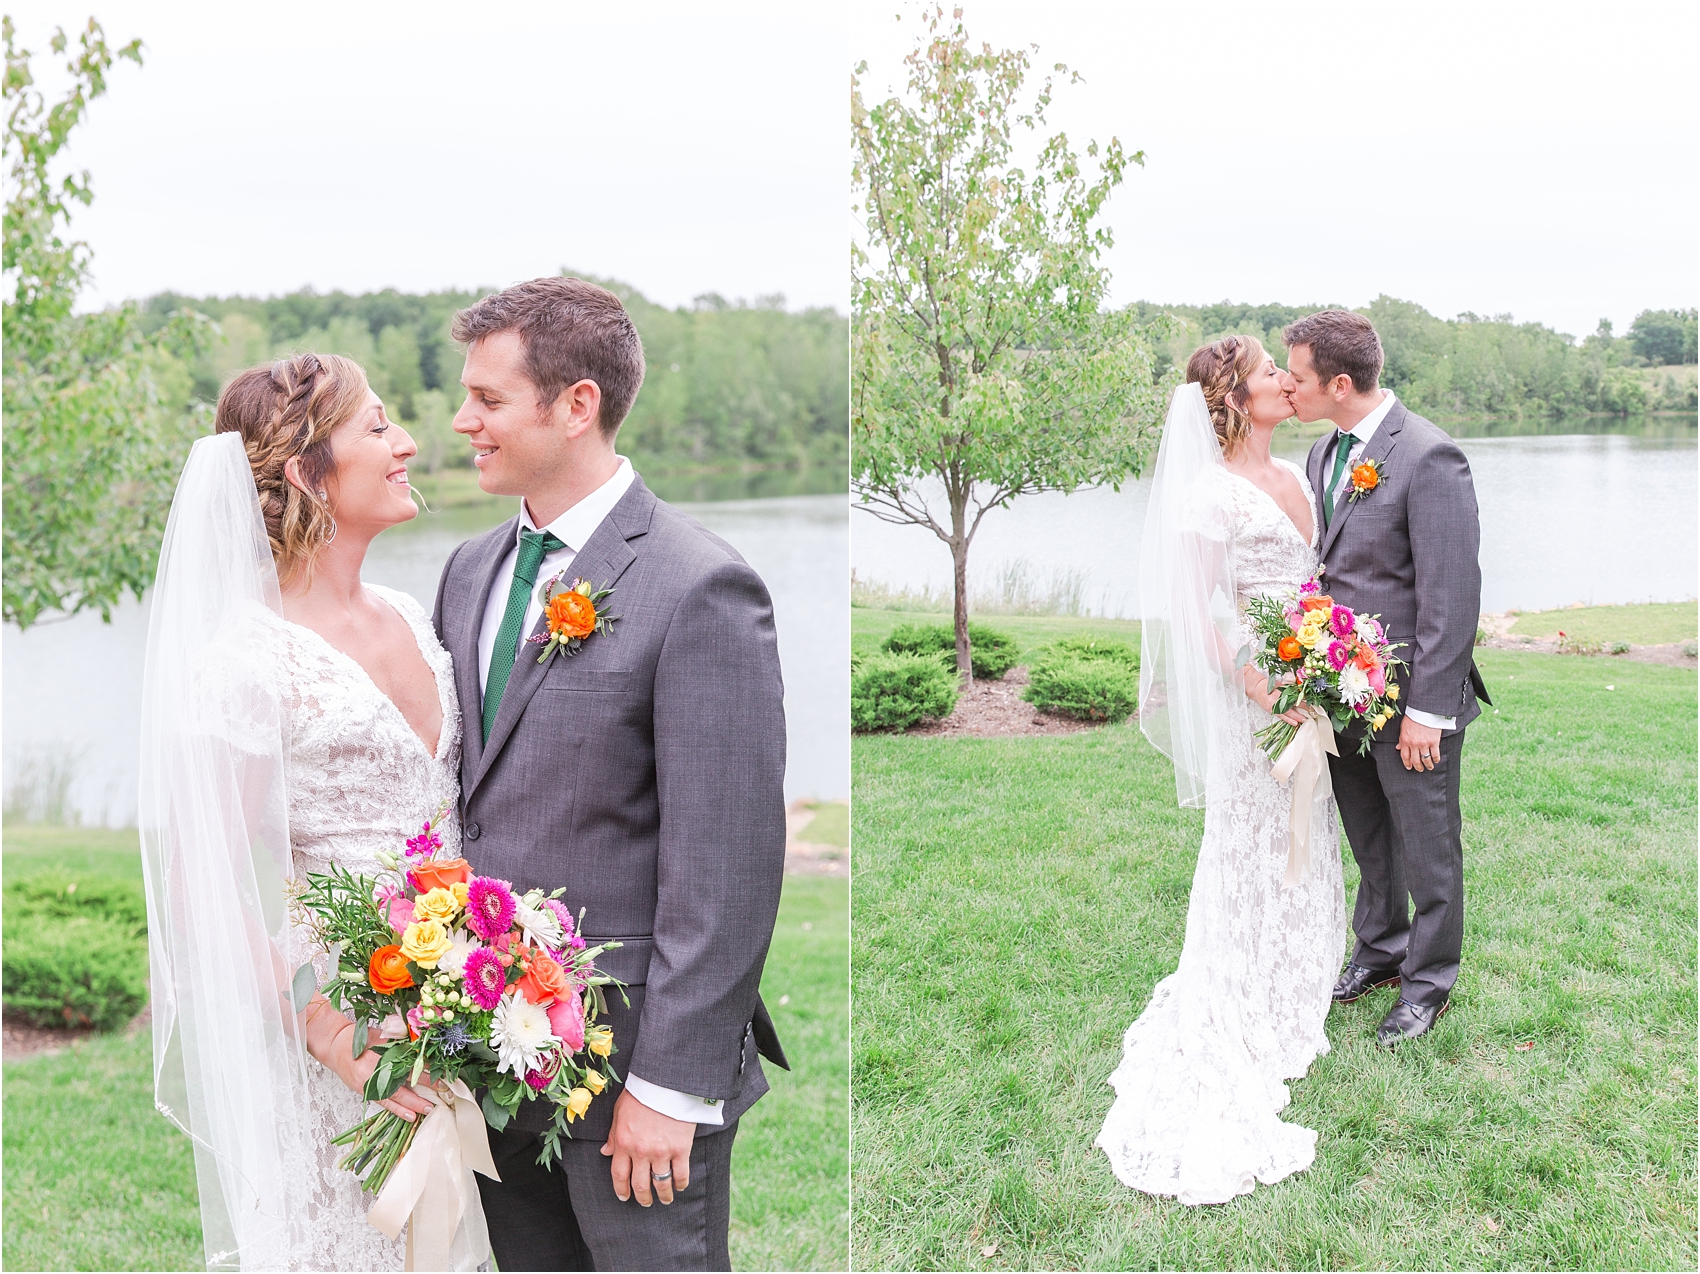 romantic-intimate-backyard-wedding-photos-at-private-estate-in-ann-arbor-mi-by-courtney-carolyn-photography_0117.jpg